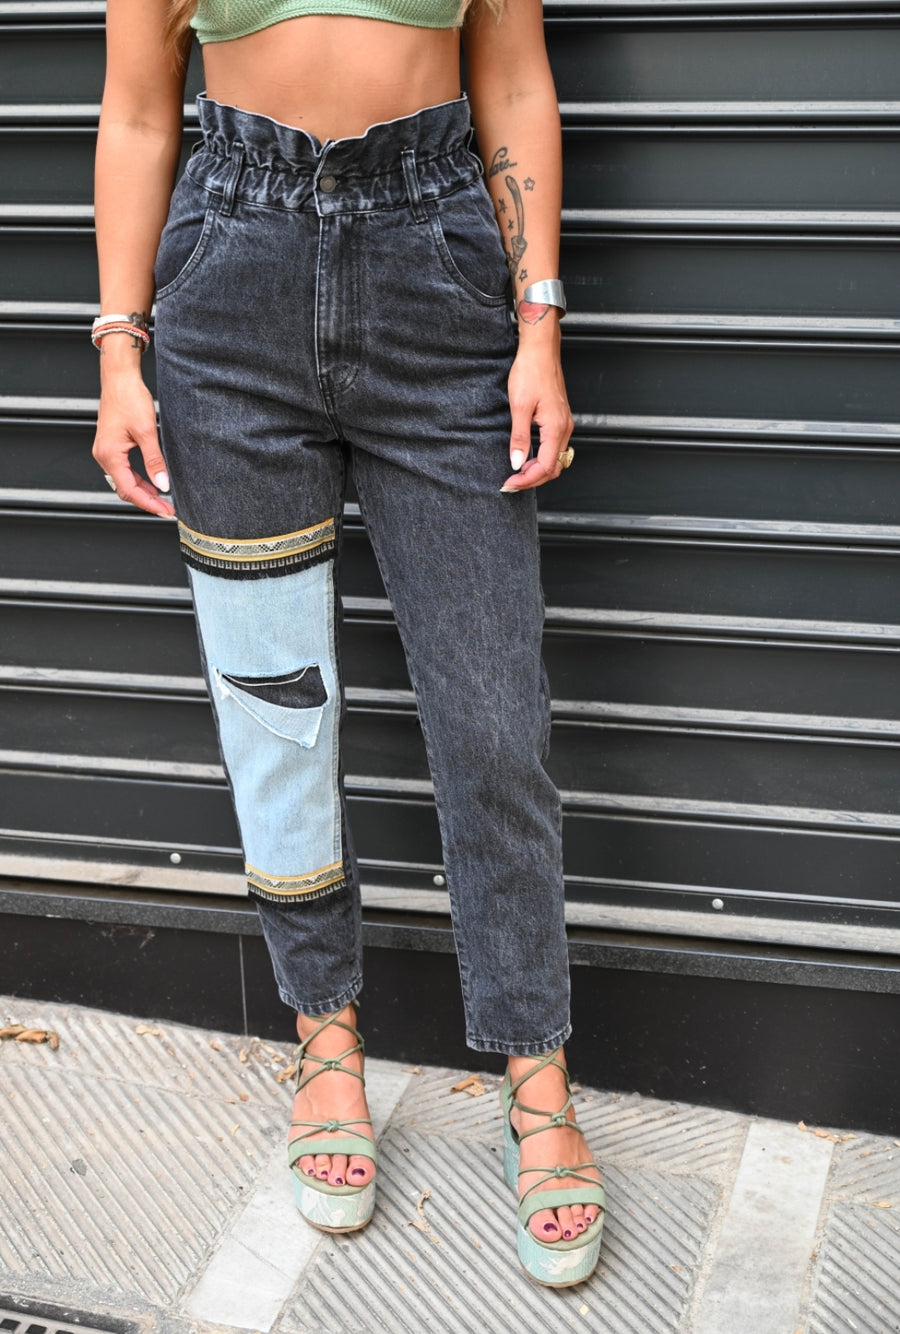 Coralina upcycled jeans